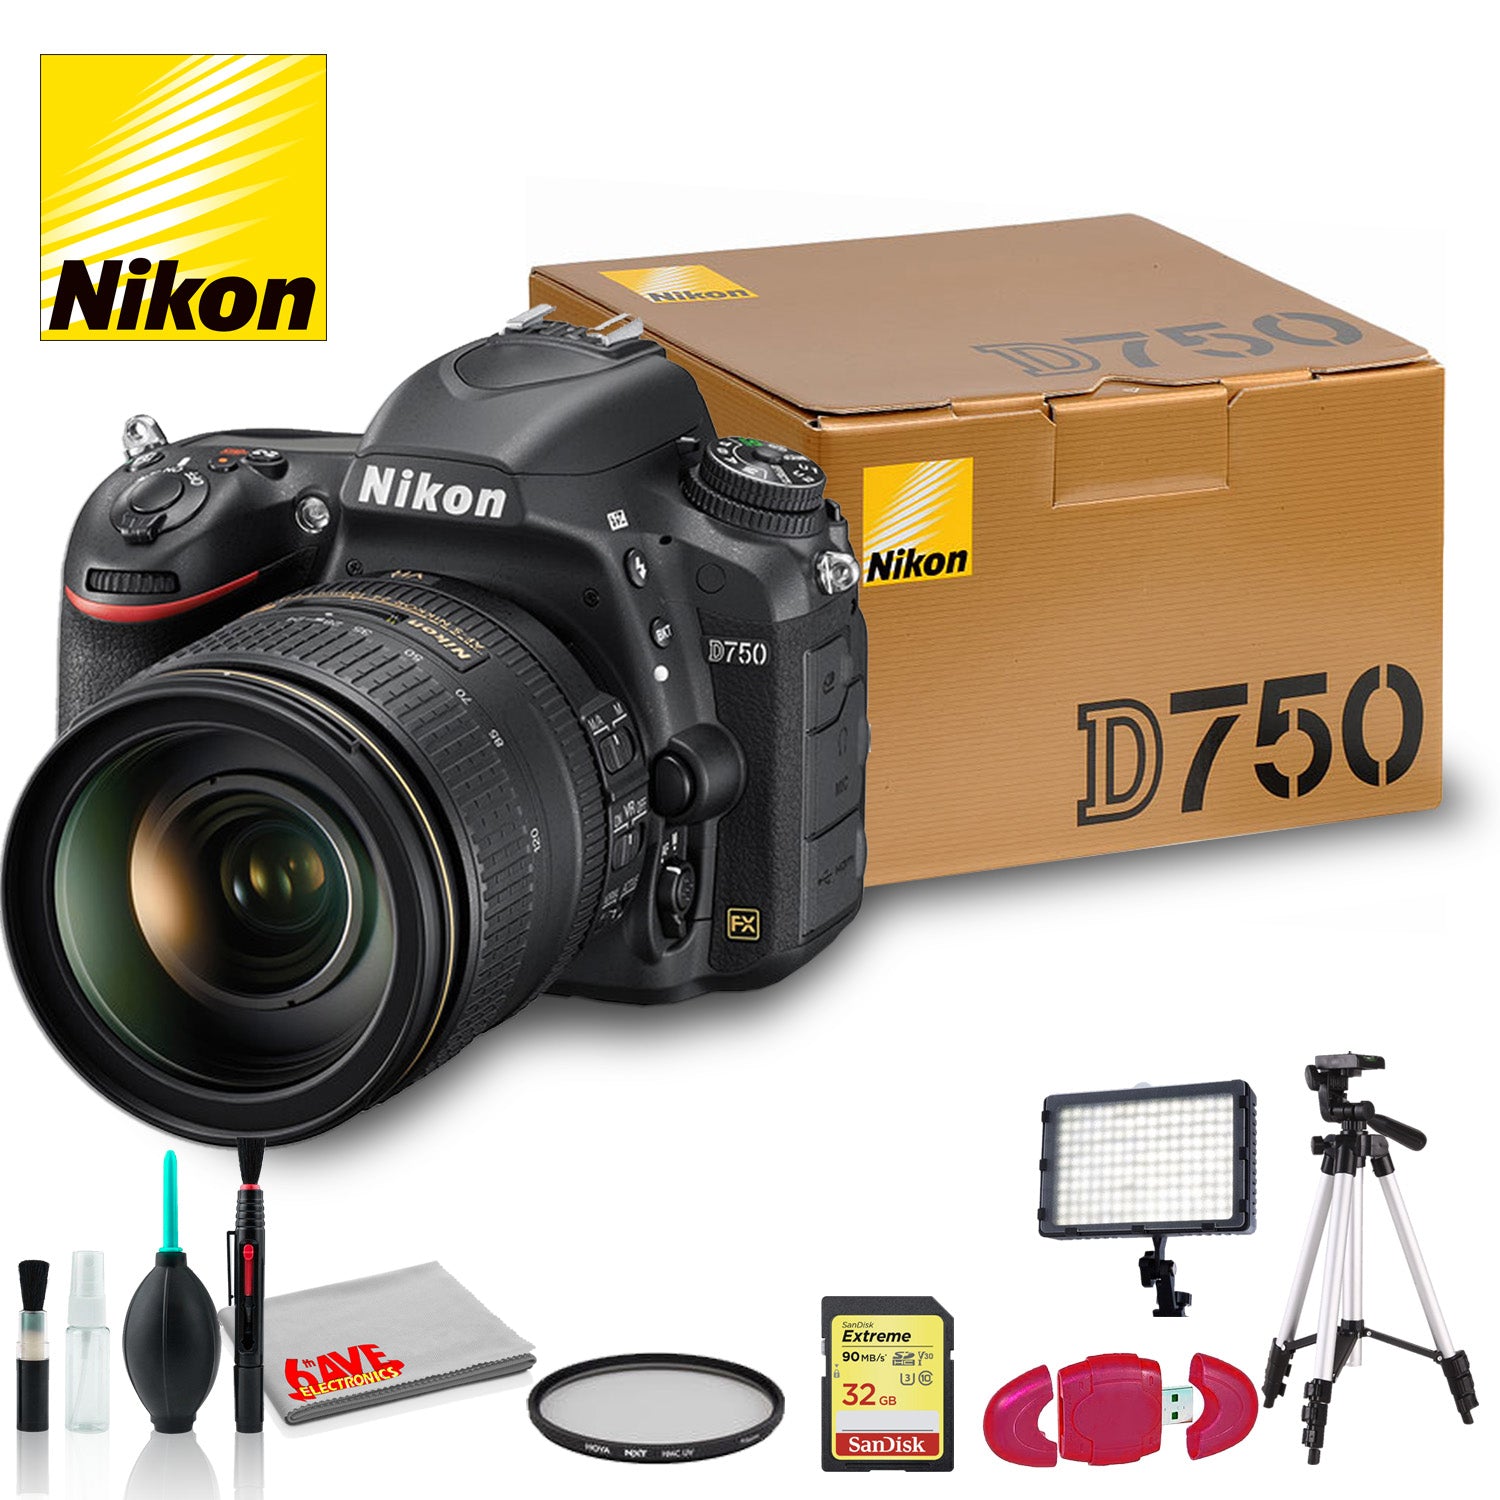 Nikon D750 DSLR Camera with 24-120mm Lens + Sandisk 32 GB SD Card, 72 Inch Tripod and more